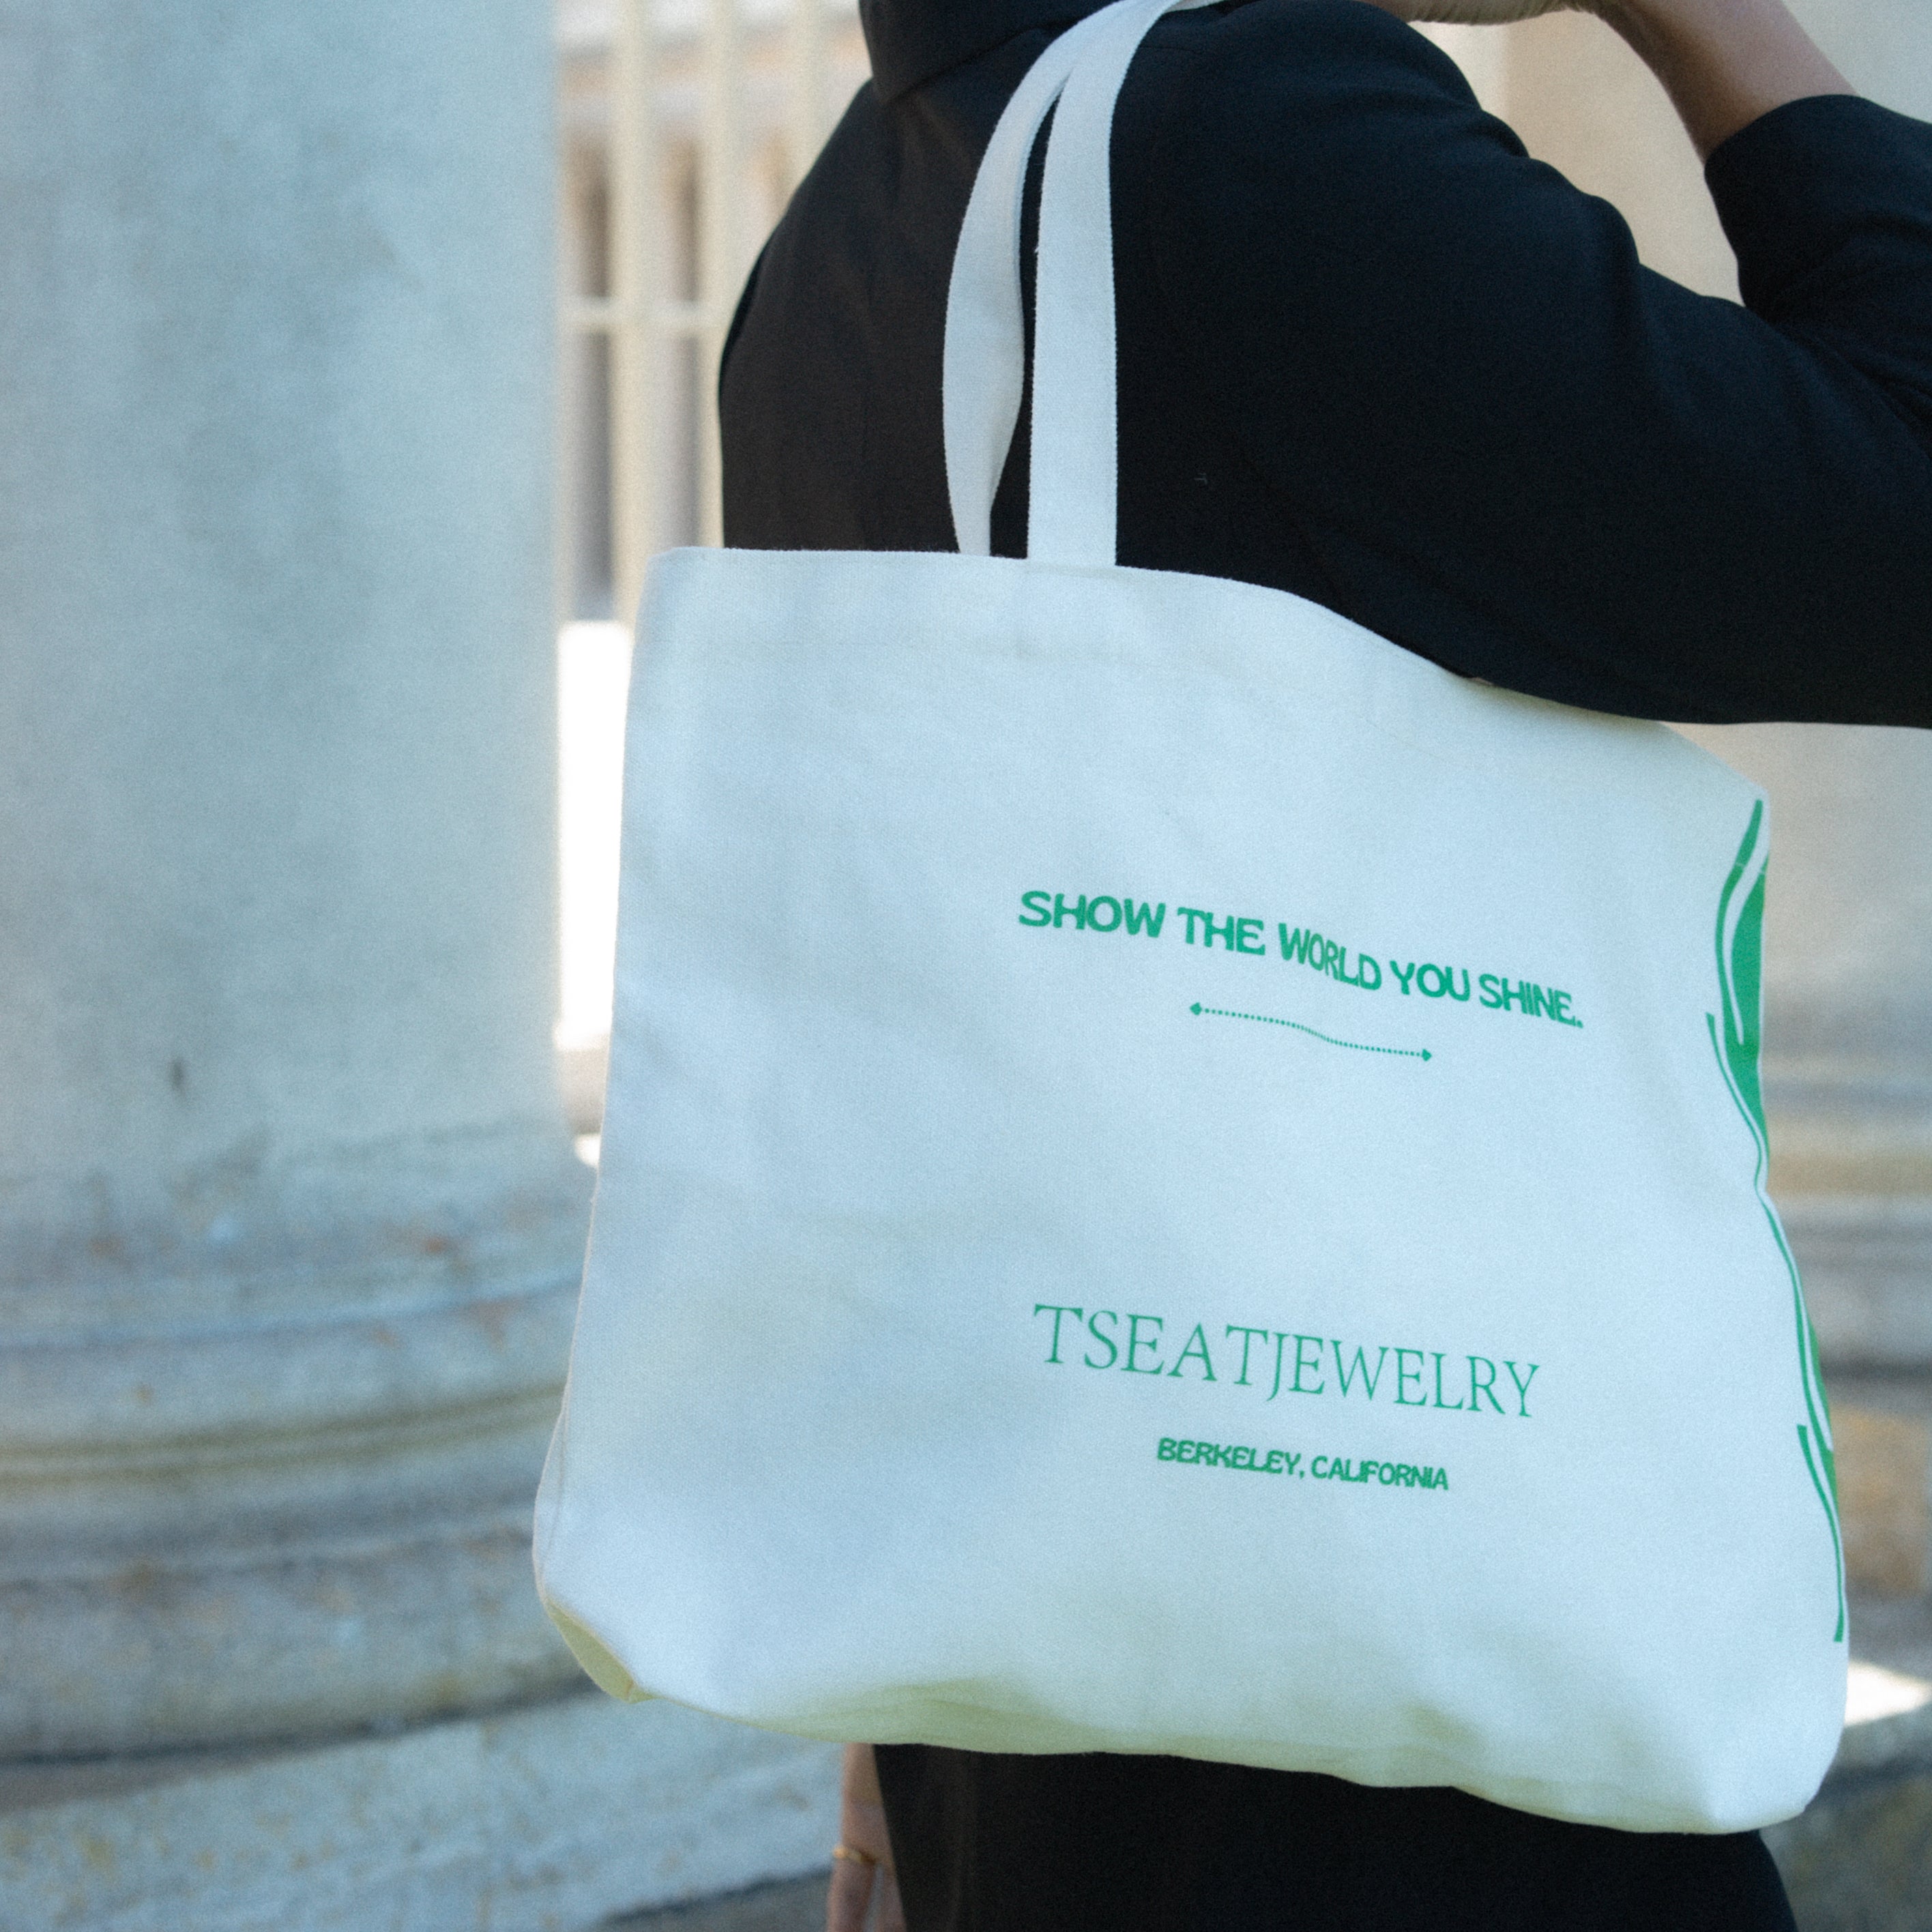 Our tote bags are perfect for carrying some books, the gym, shopping, as a travel bag, to the picnic  or even as a beach bag.  Dimension: 17"x13"x3" 